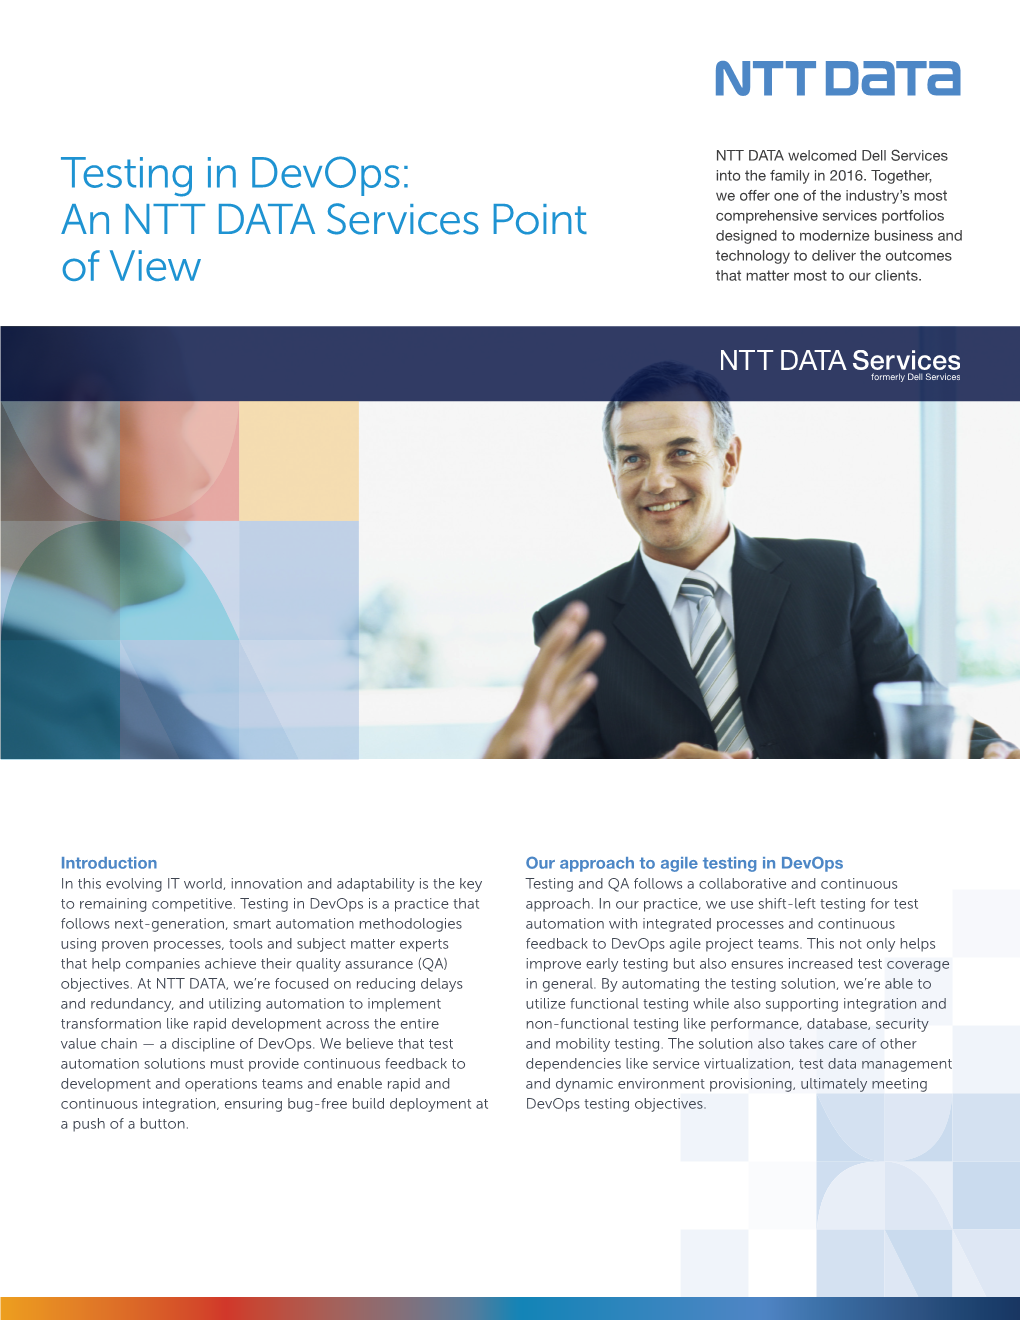 Testing in Devops: an NTT DATA Services Point of View